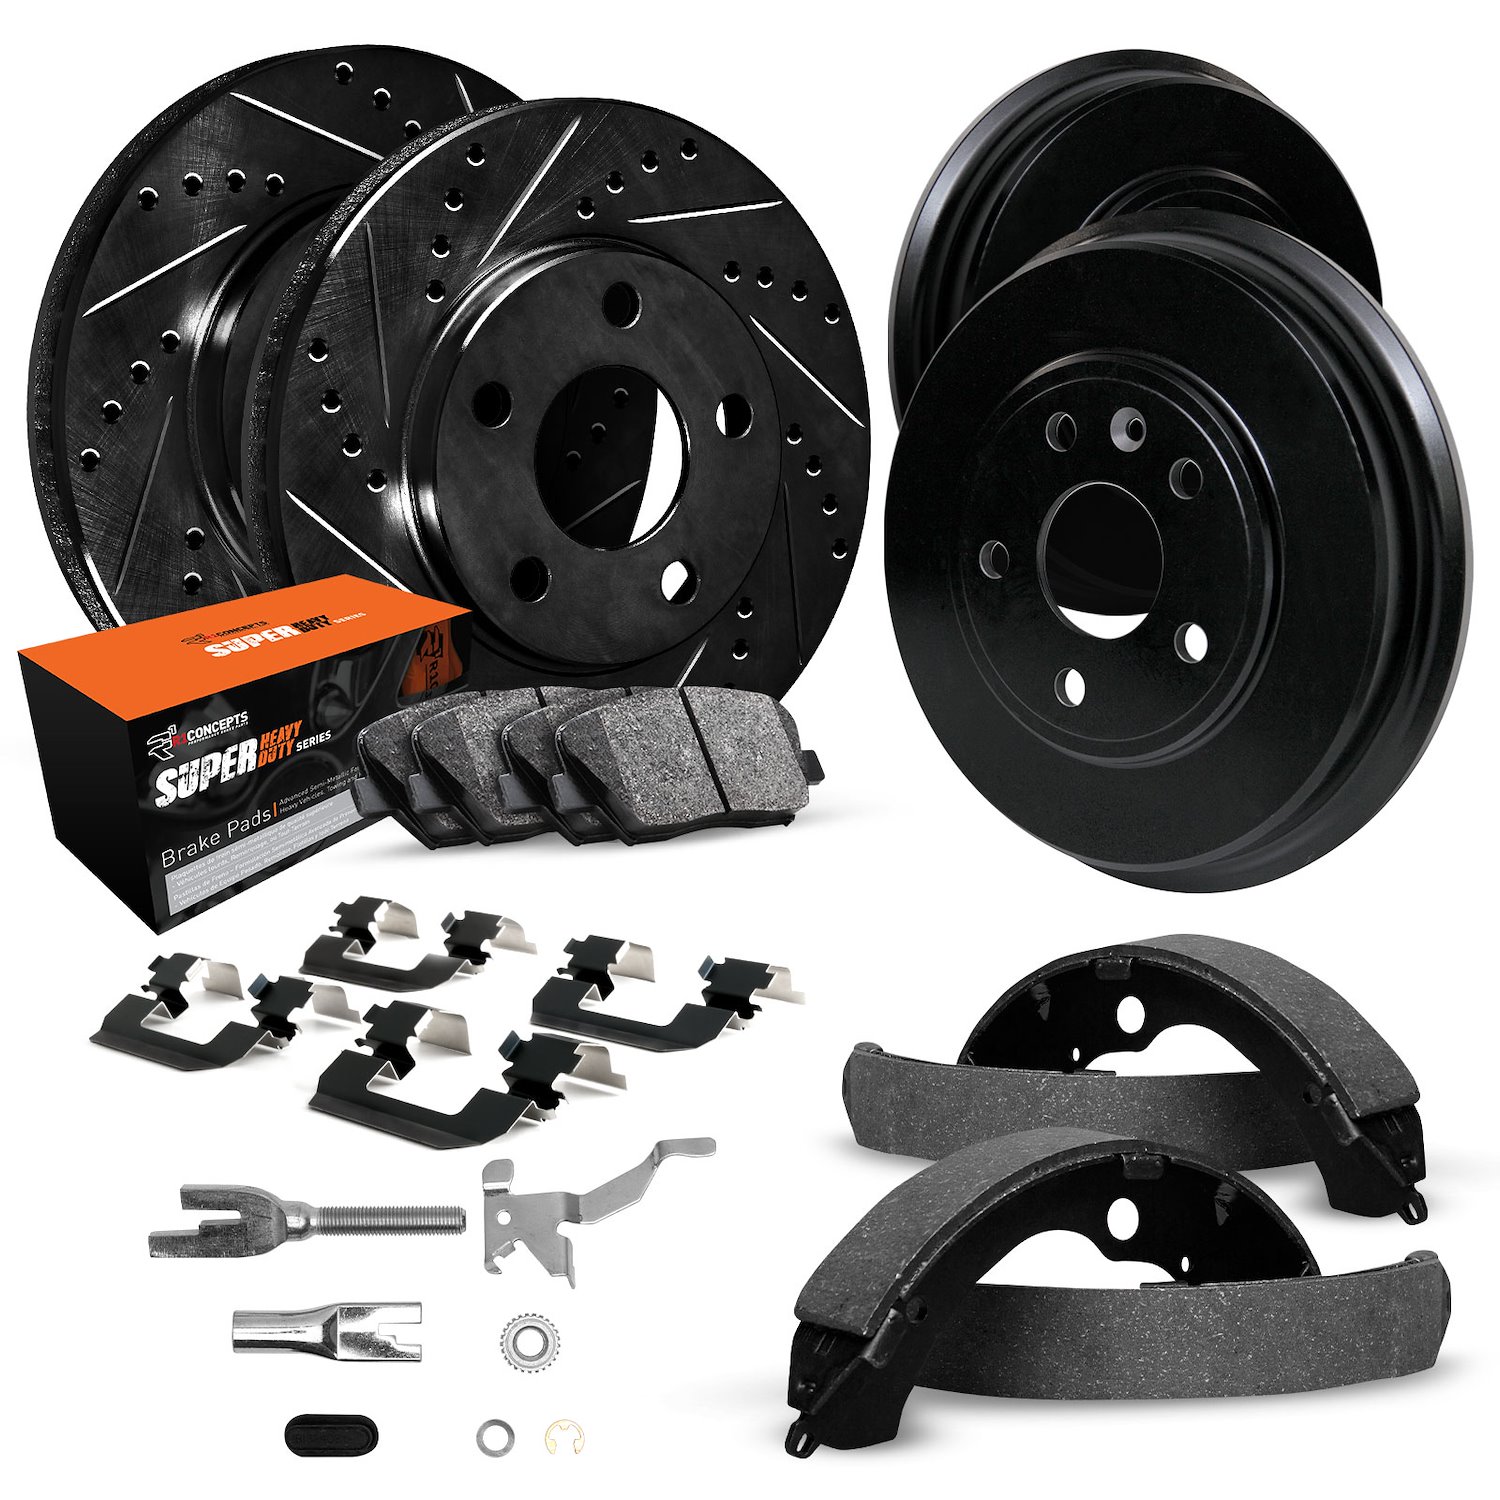 E-Line Drilled/Slotted Black Rotor & Drum Set w/Super-Duty Pads, Shoes, Hardware/Adjusters, 1991-1996 GM